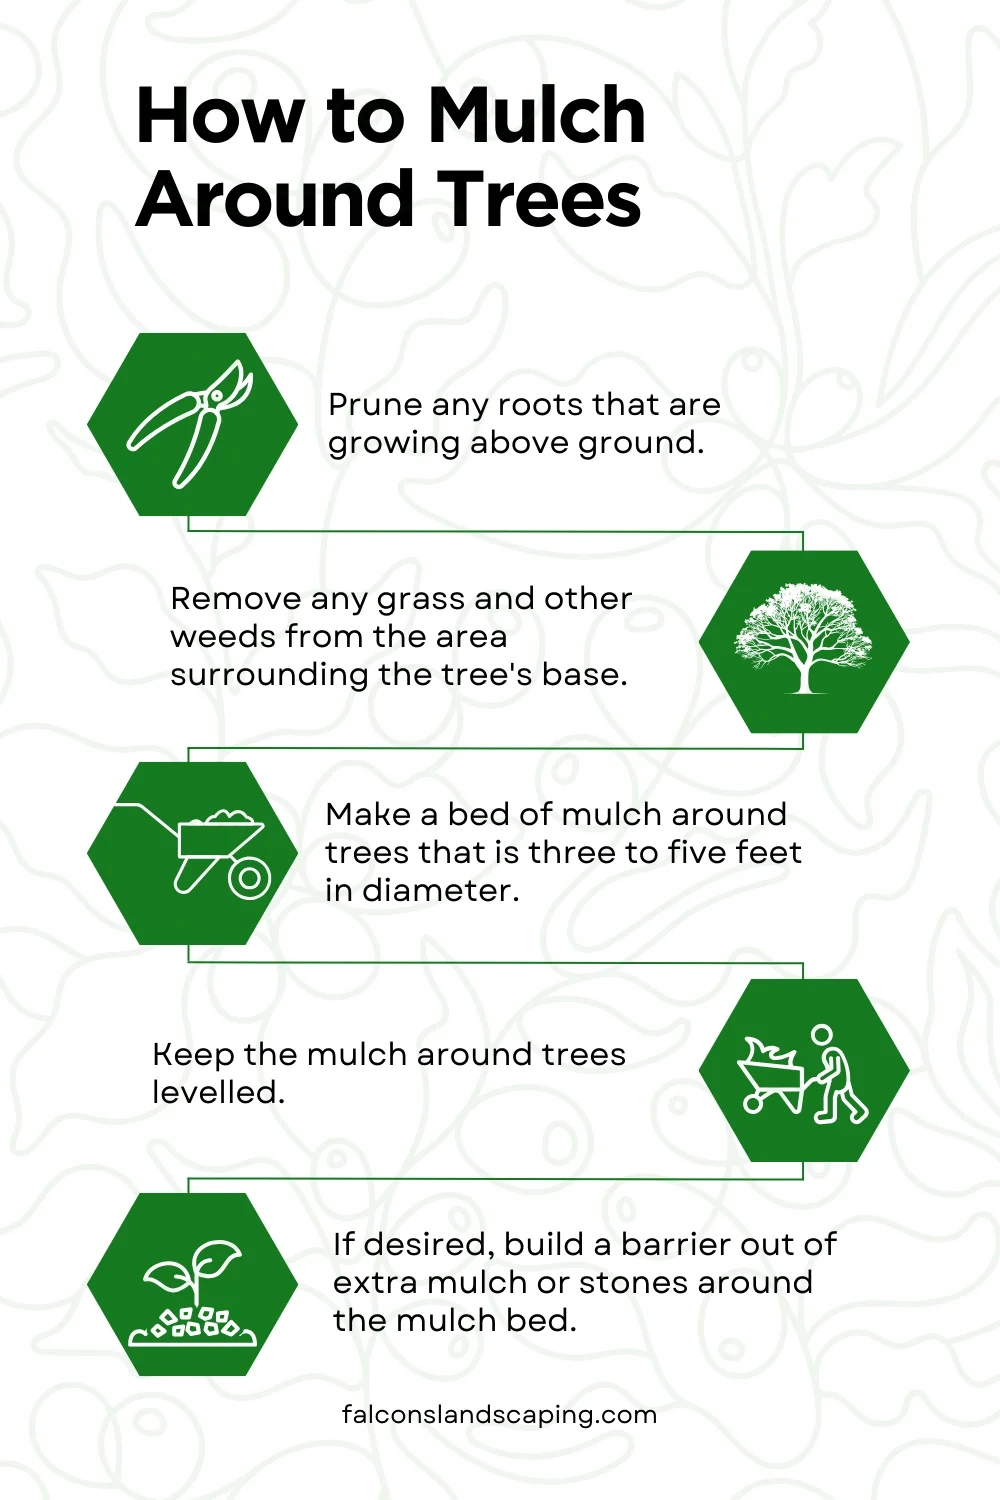 A list infographic on how to mulch around trees